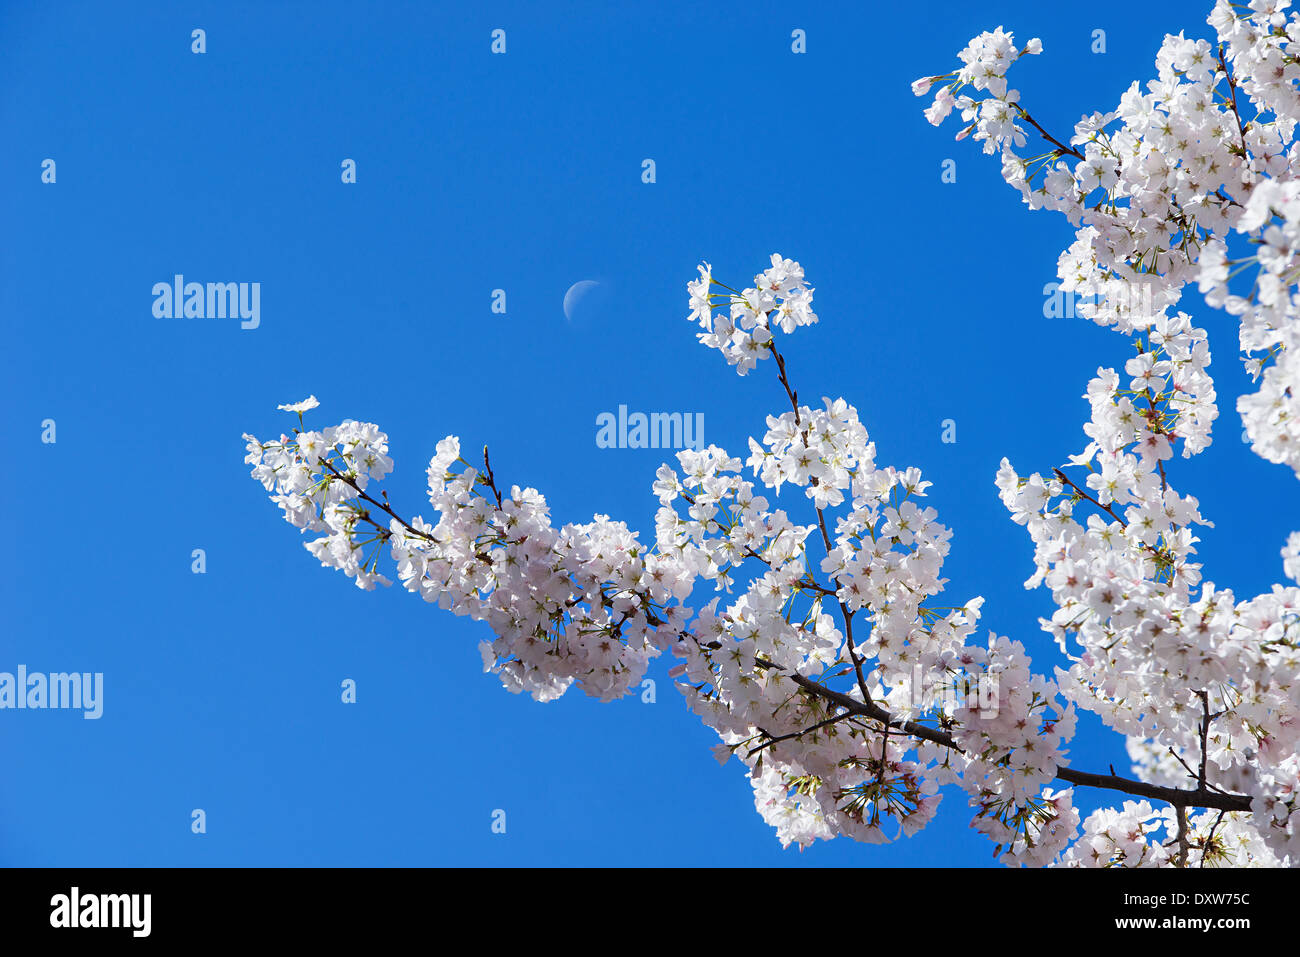 White cherry tree blossoms in spring against blue sky with the moon Stock Photo